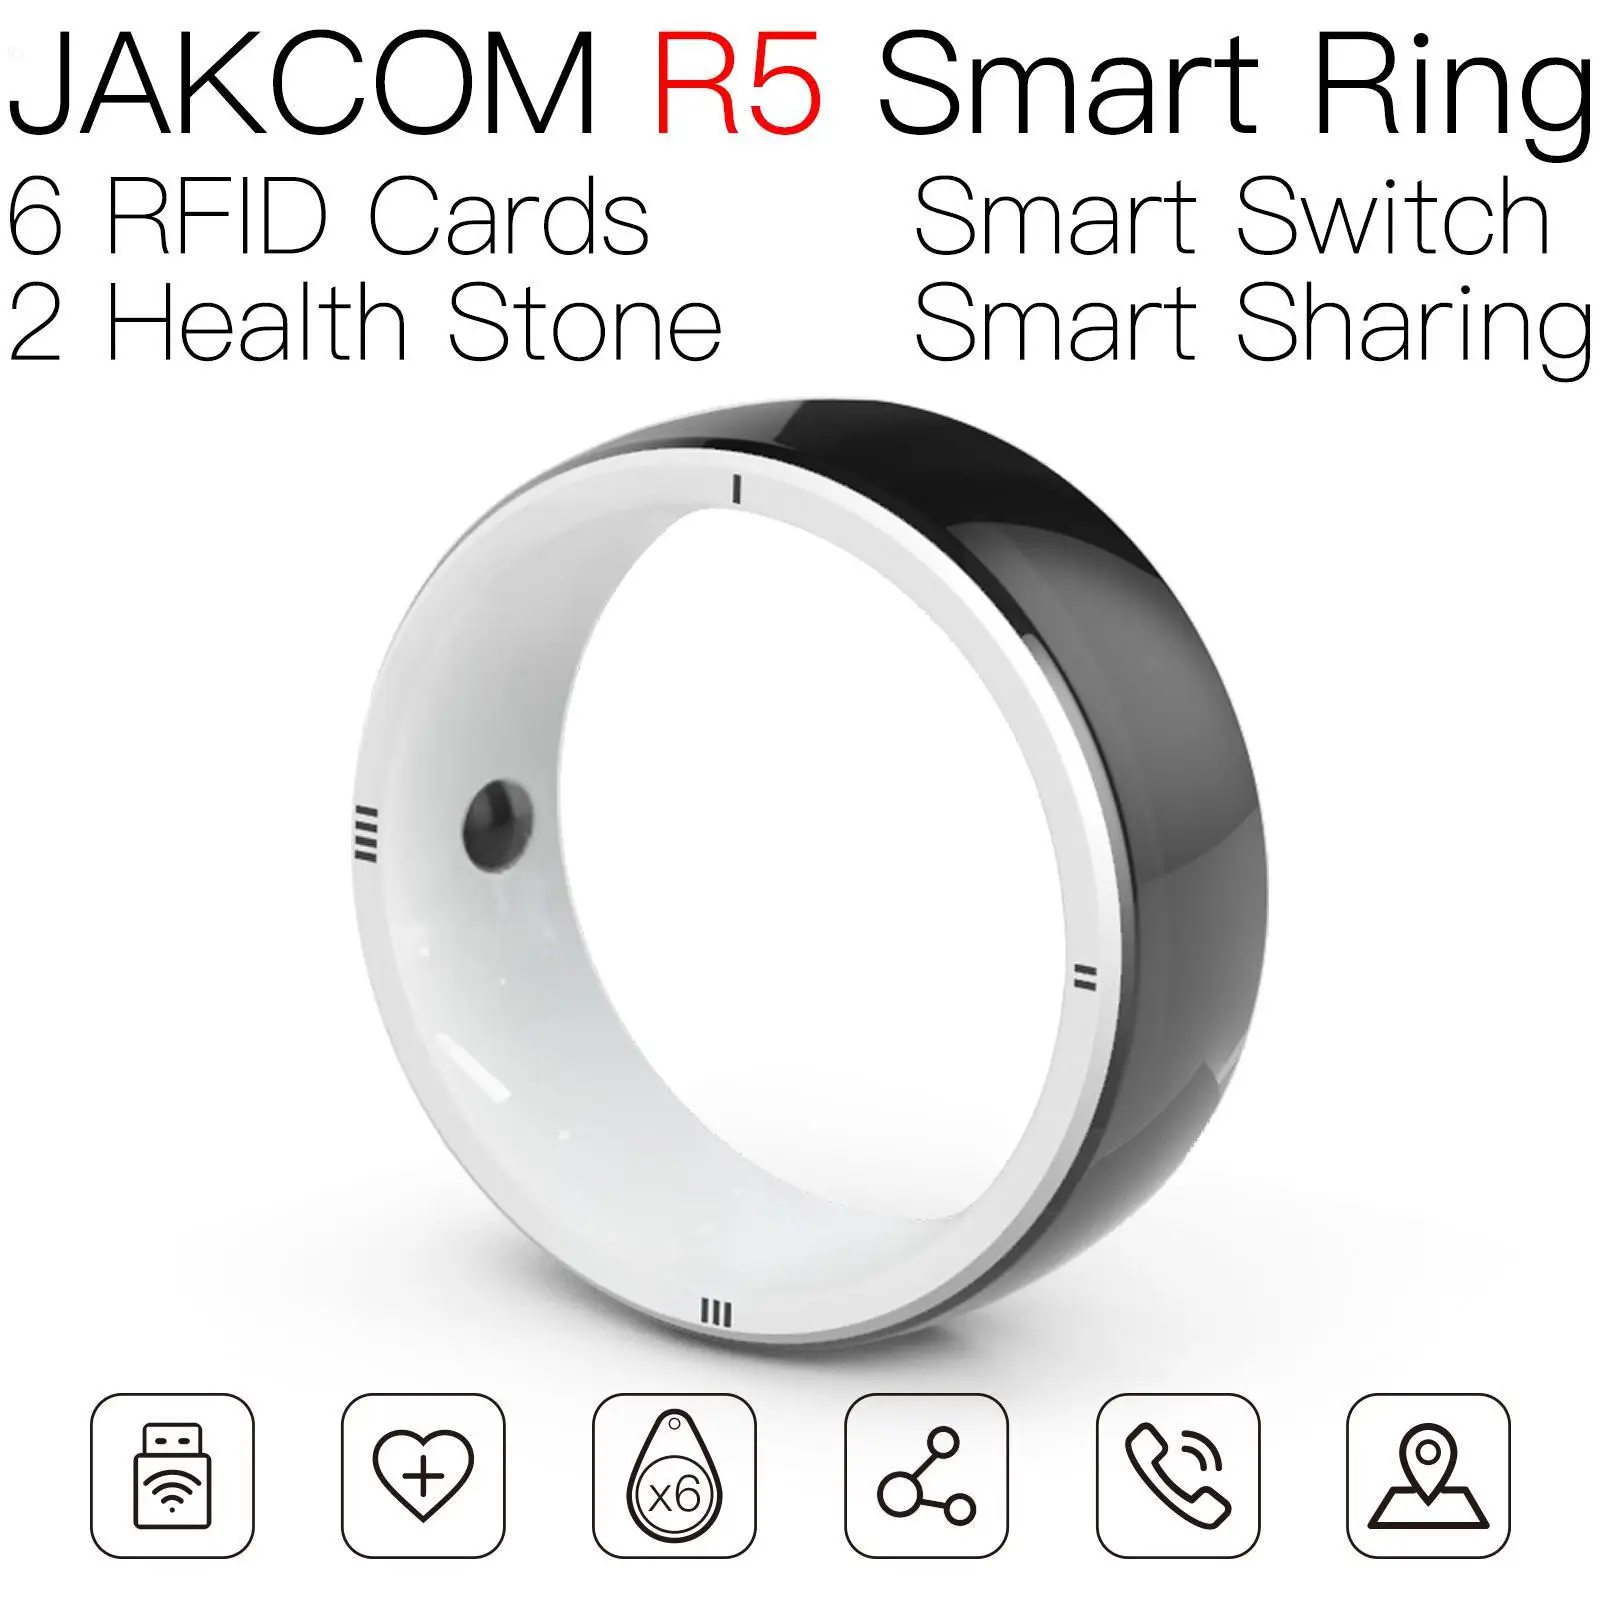 

JAKCOM R5 Smart Ring For men women uid changeable clone 12 months square card blanks t5577 epoxy tag nfc microcontroller